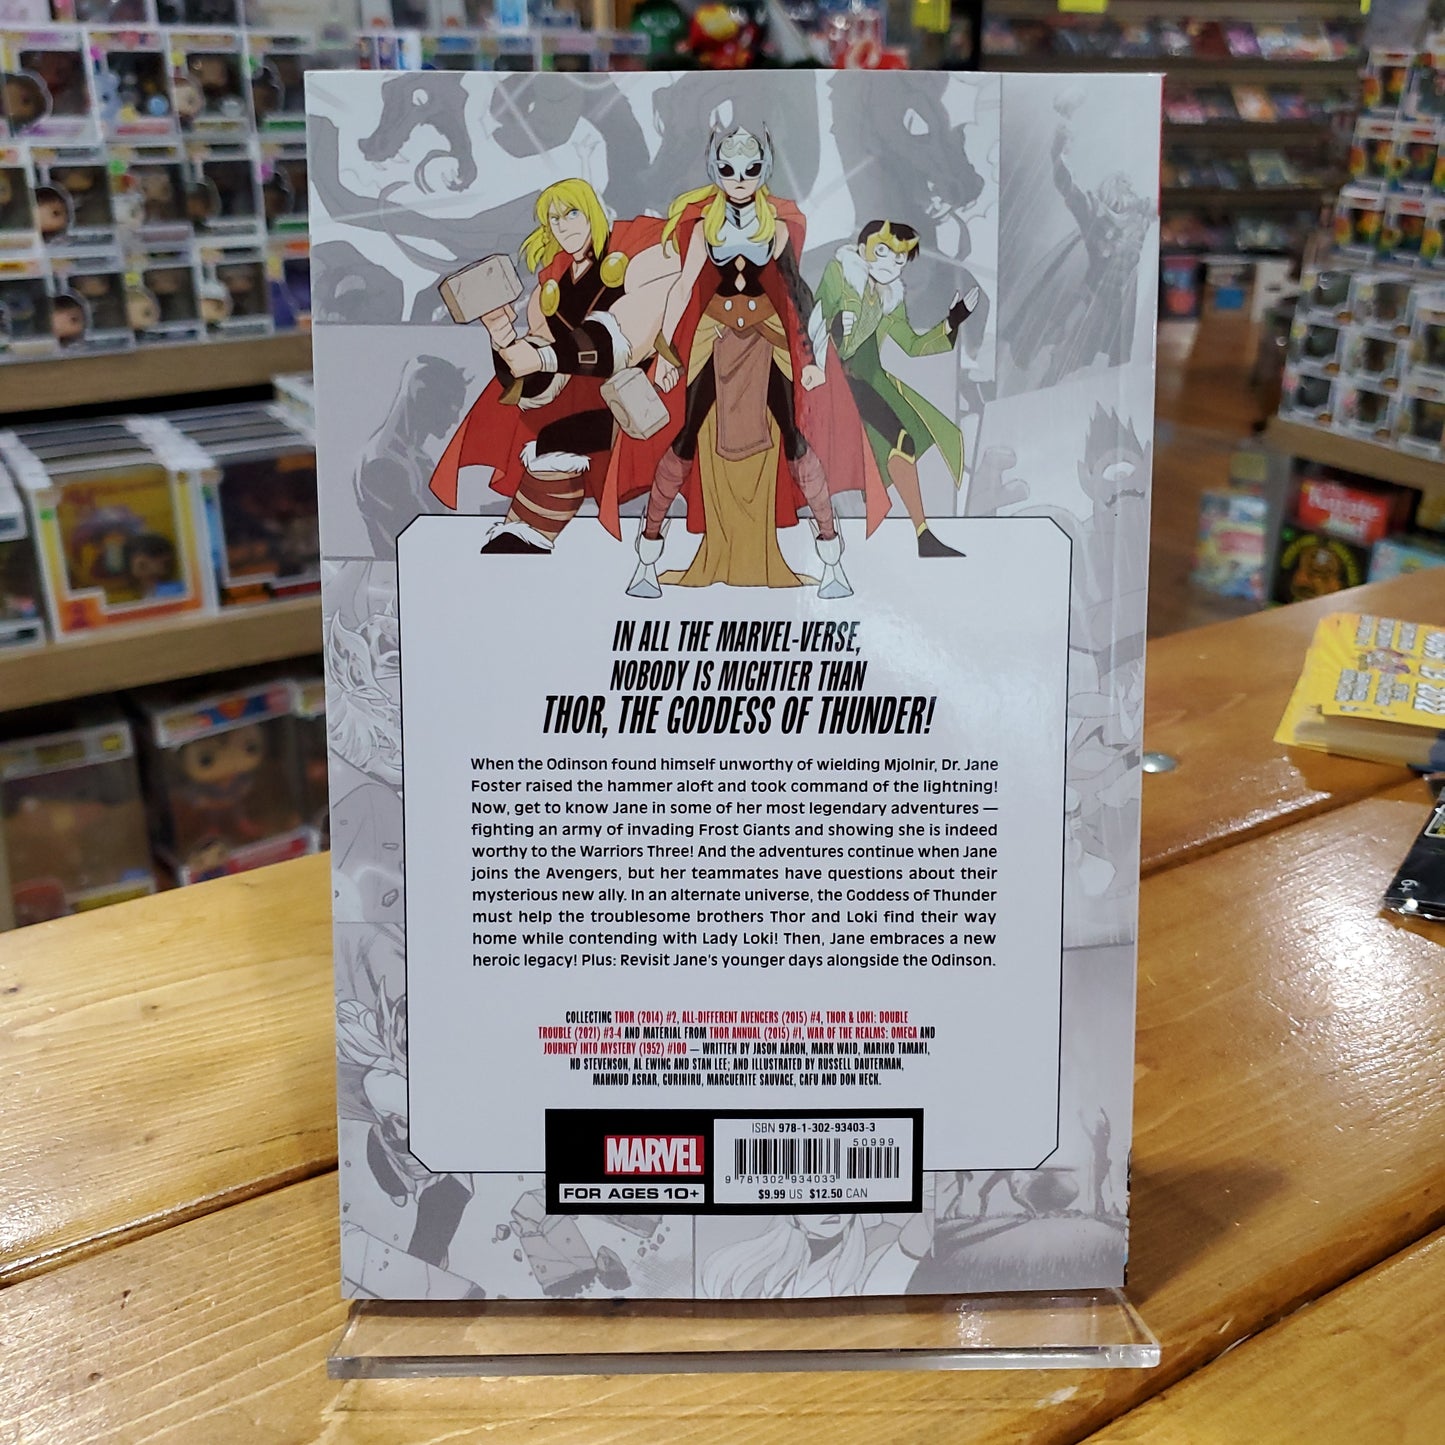 Marvel-verse - The Mighty Thor - Graphic Novel